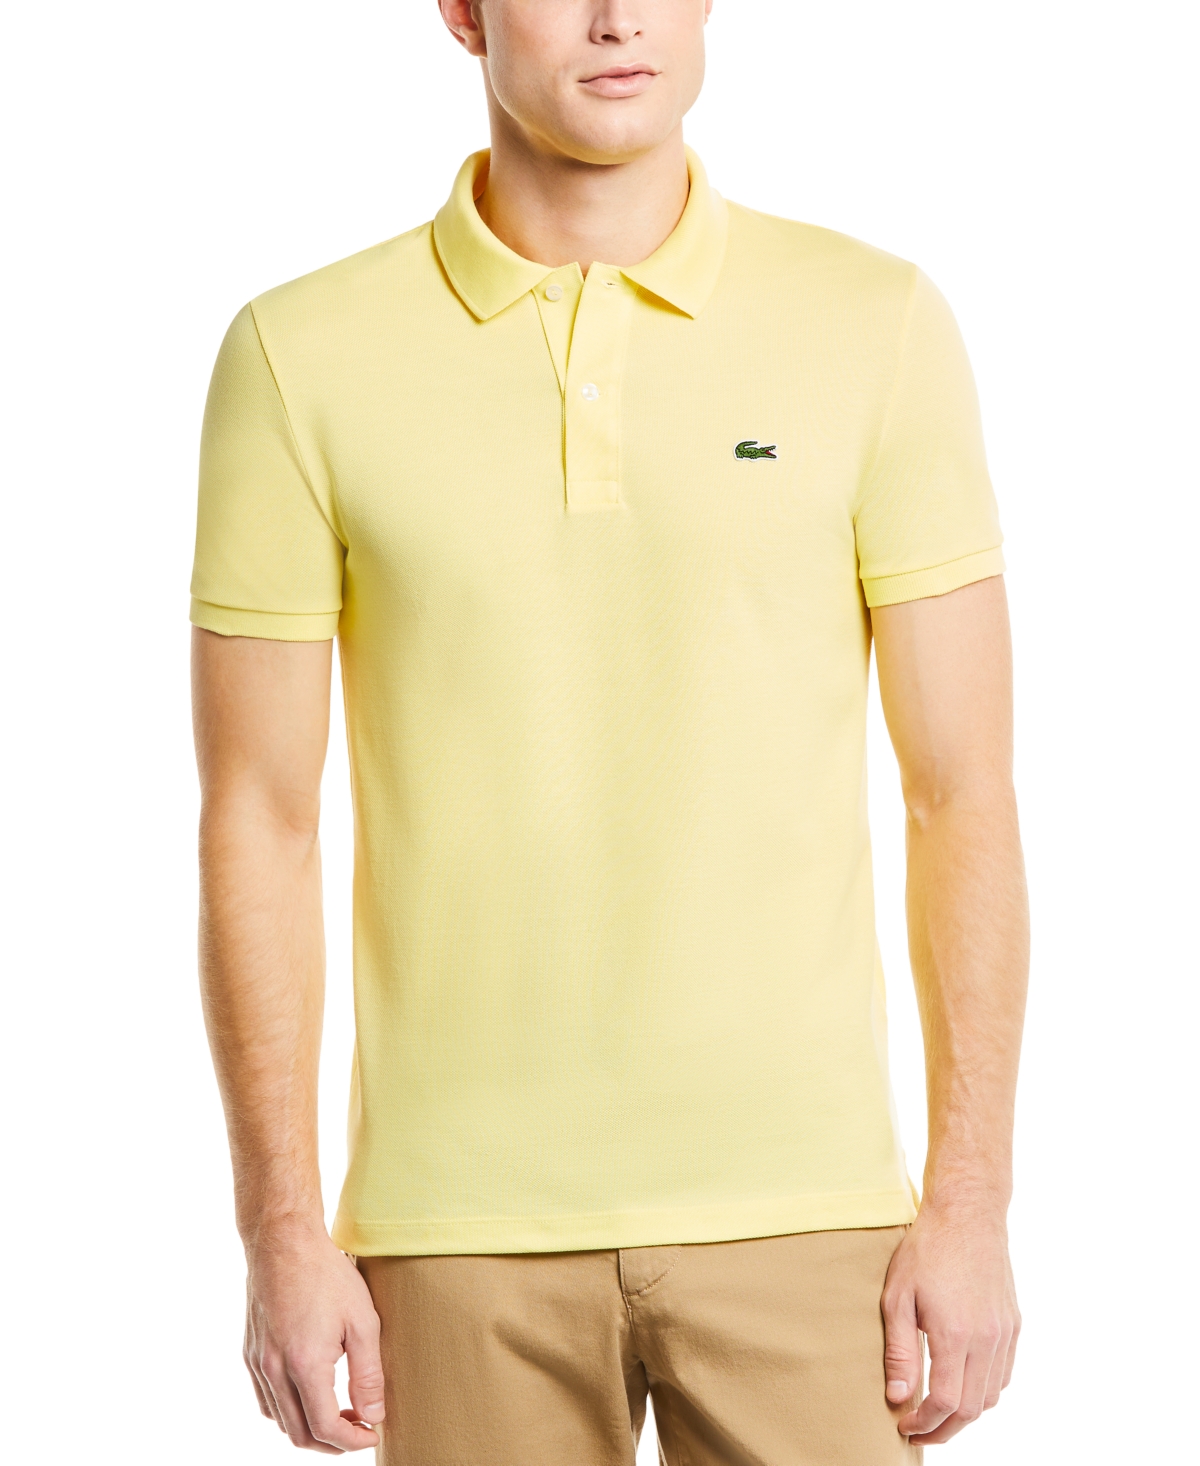 Lacoste Men's Signature Polo Shirt In Brght Yell